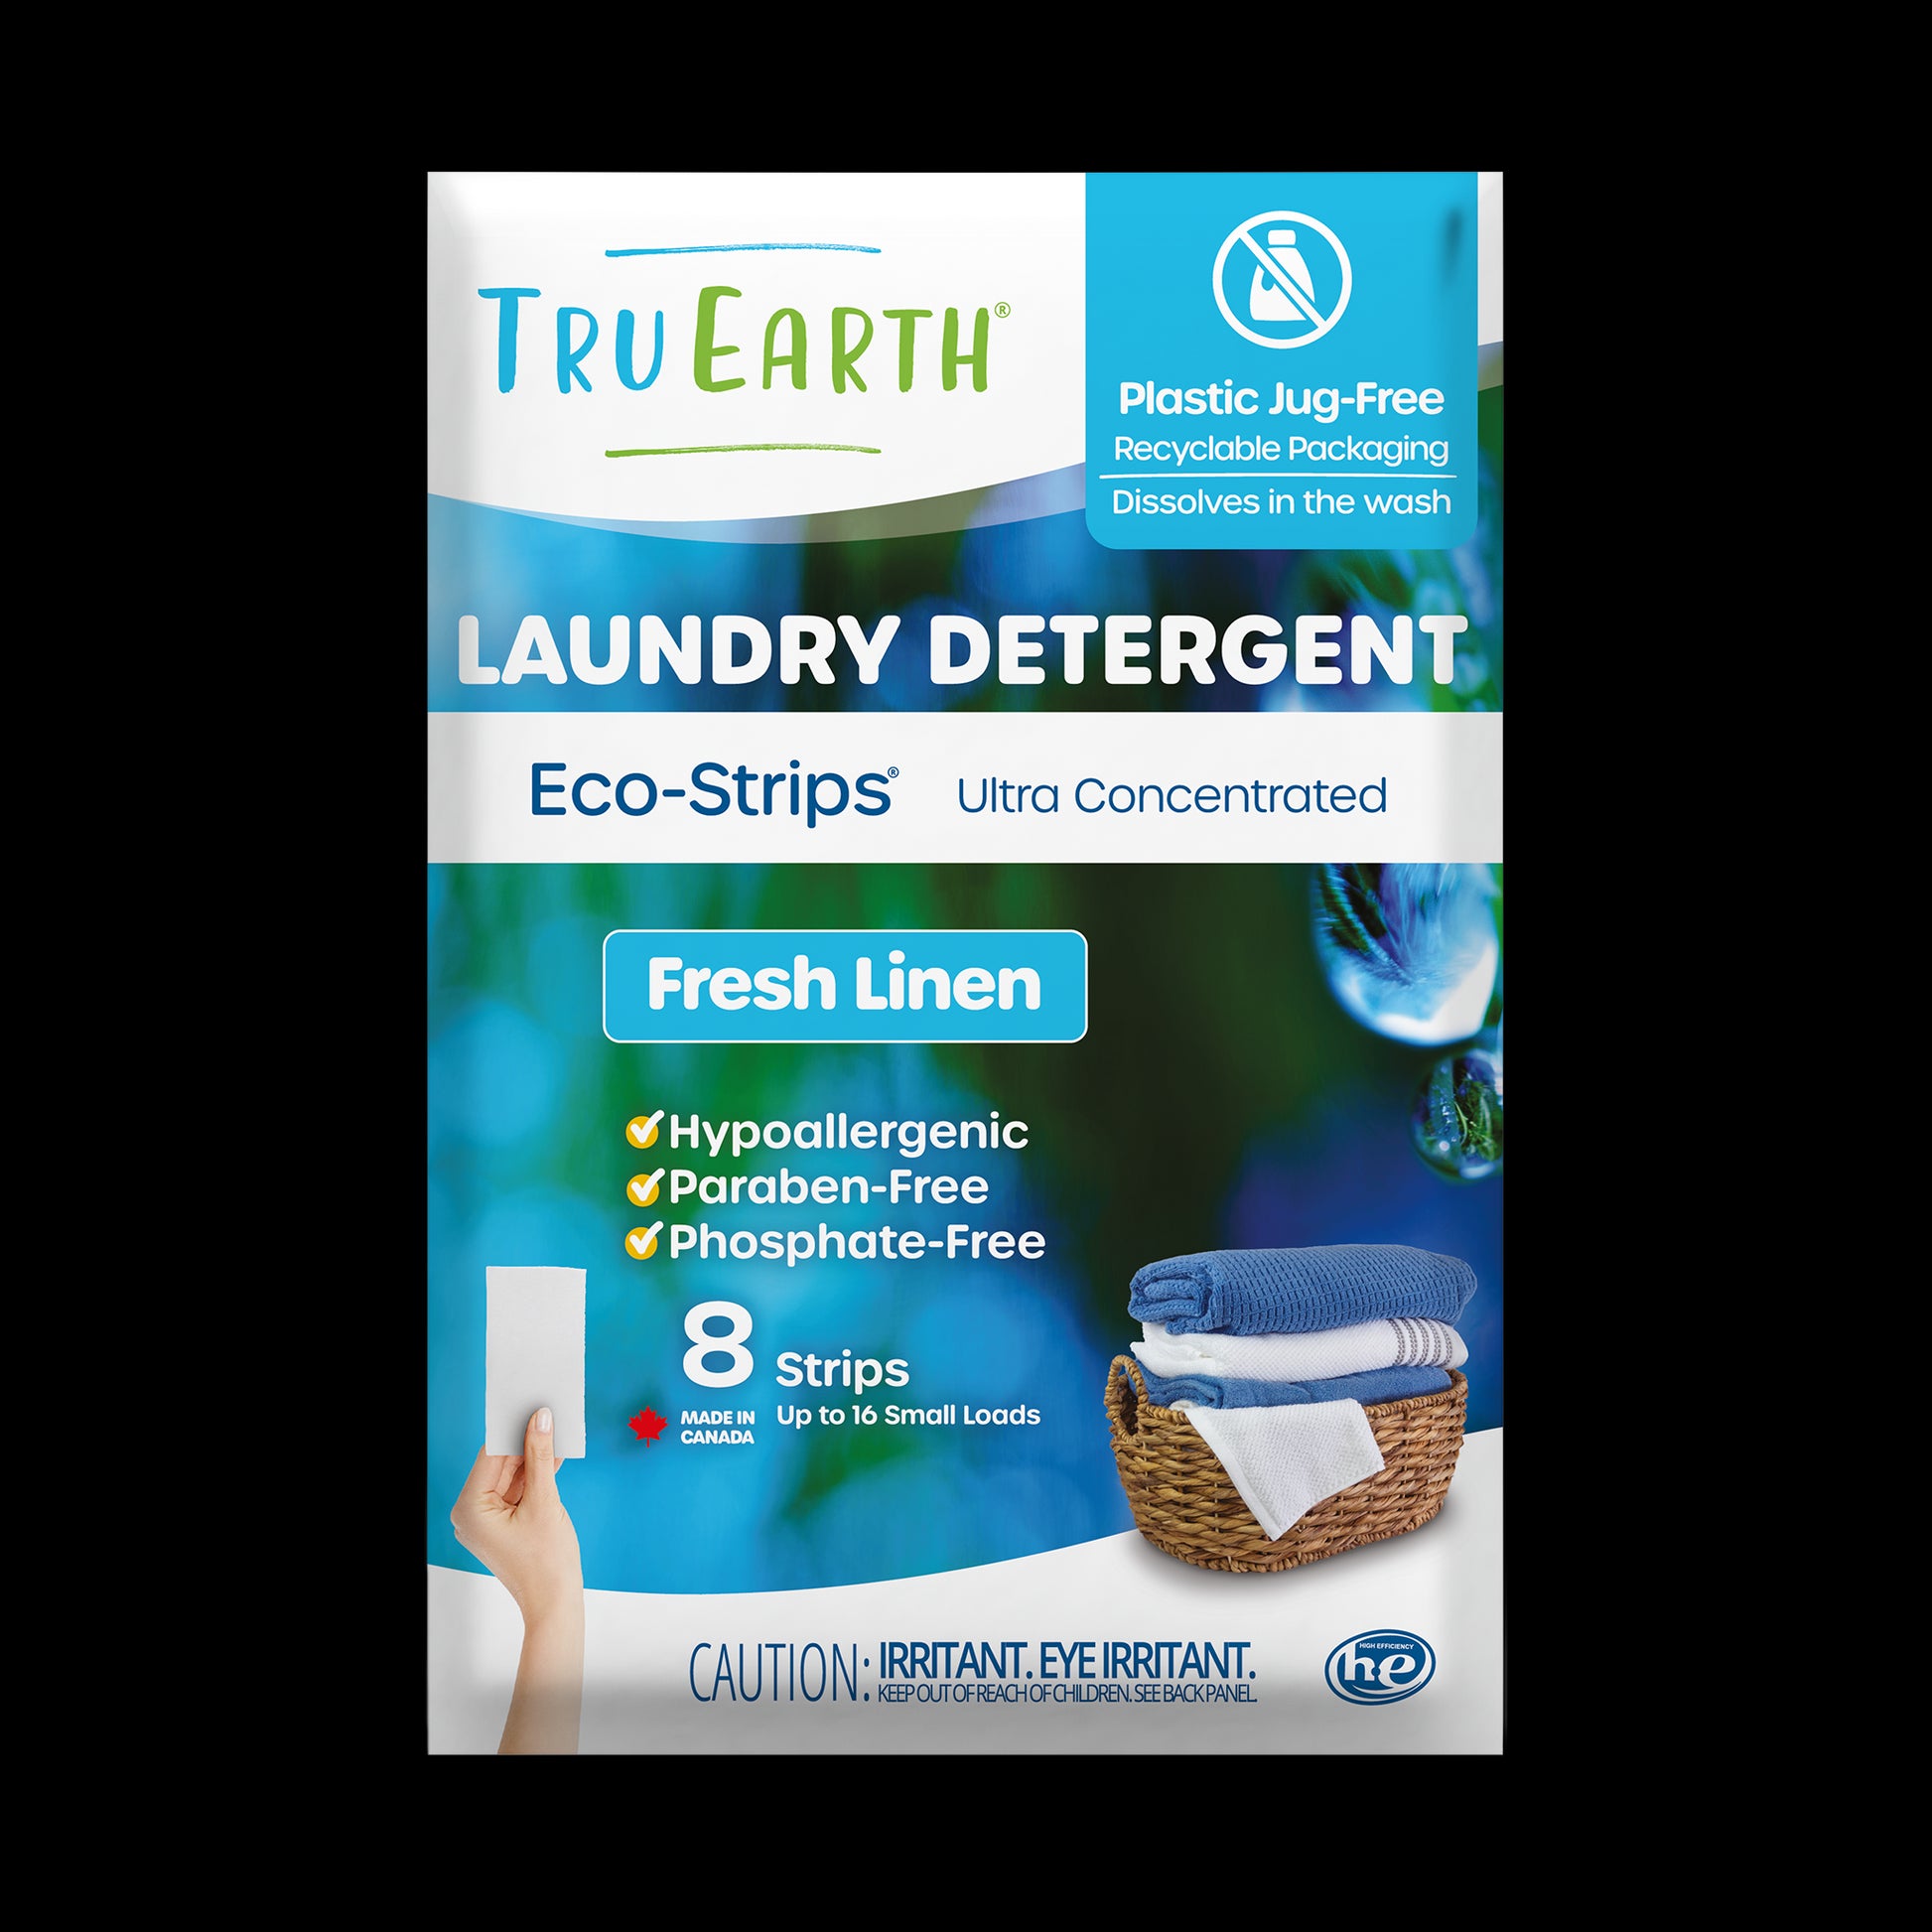 TruEarth Laundry Detergent Fresh Linen Front of Package